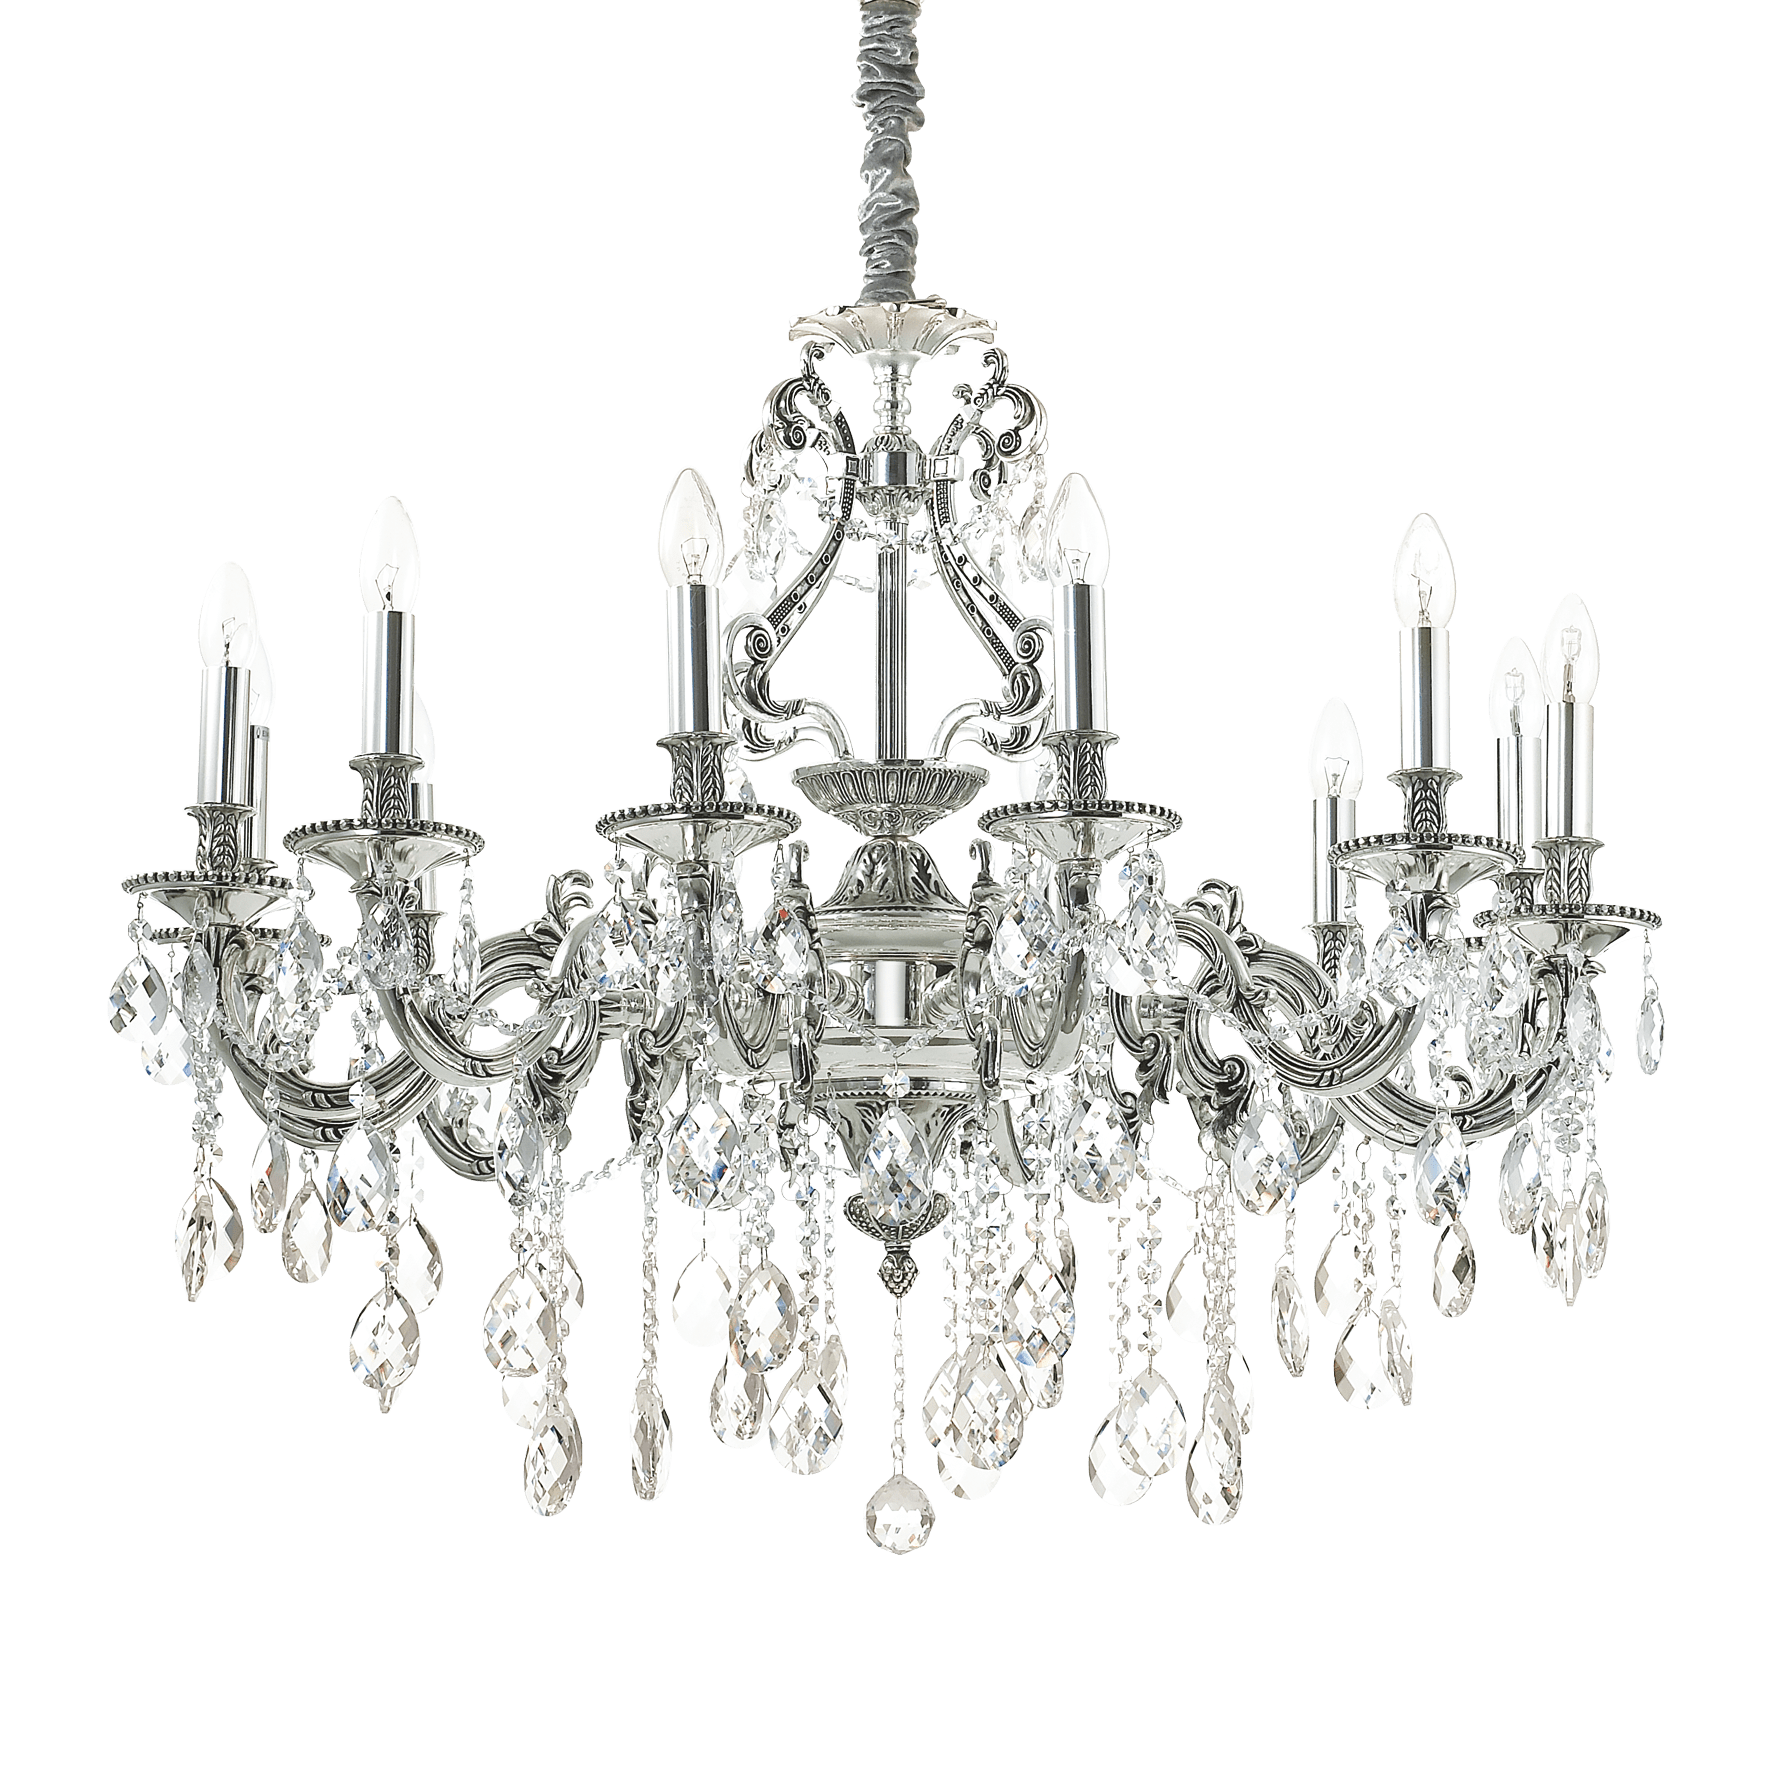 Ideal Lux Lighting Chandeliers Antique silver Mona Lisa Crystal Chandelier